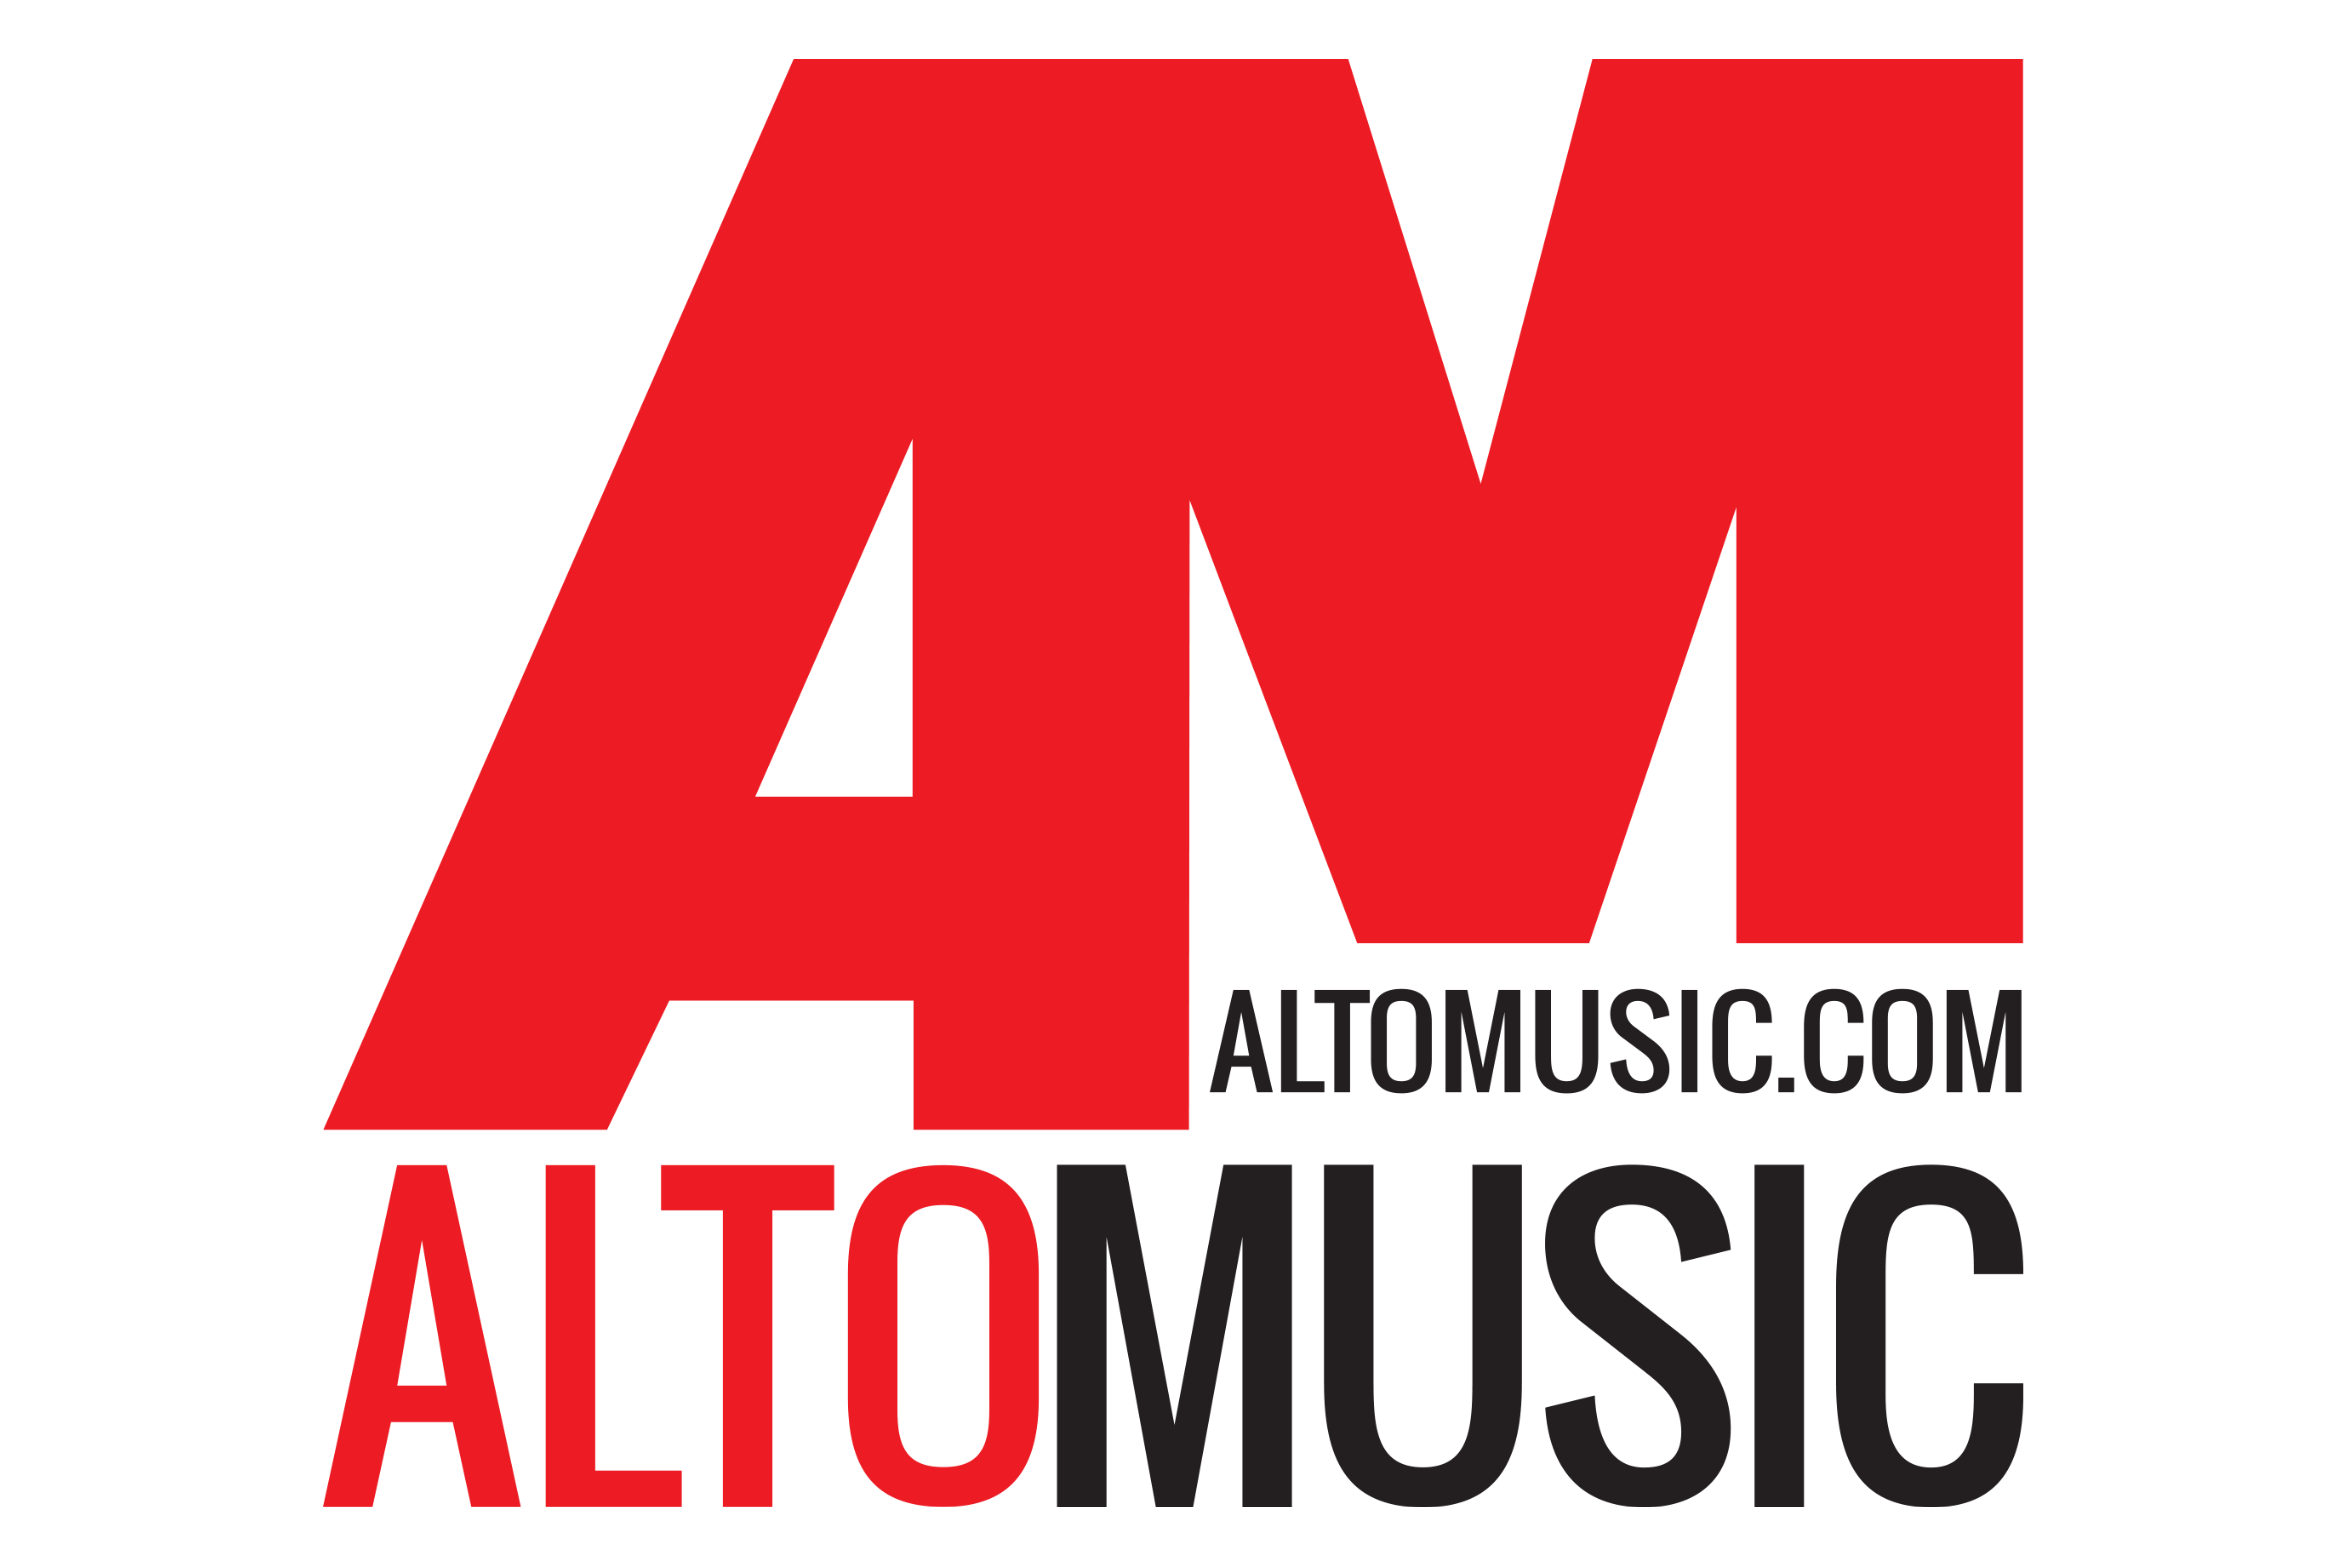 ALTO MUSIC In Middletown NY